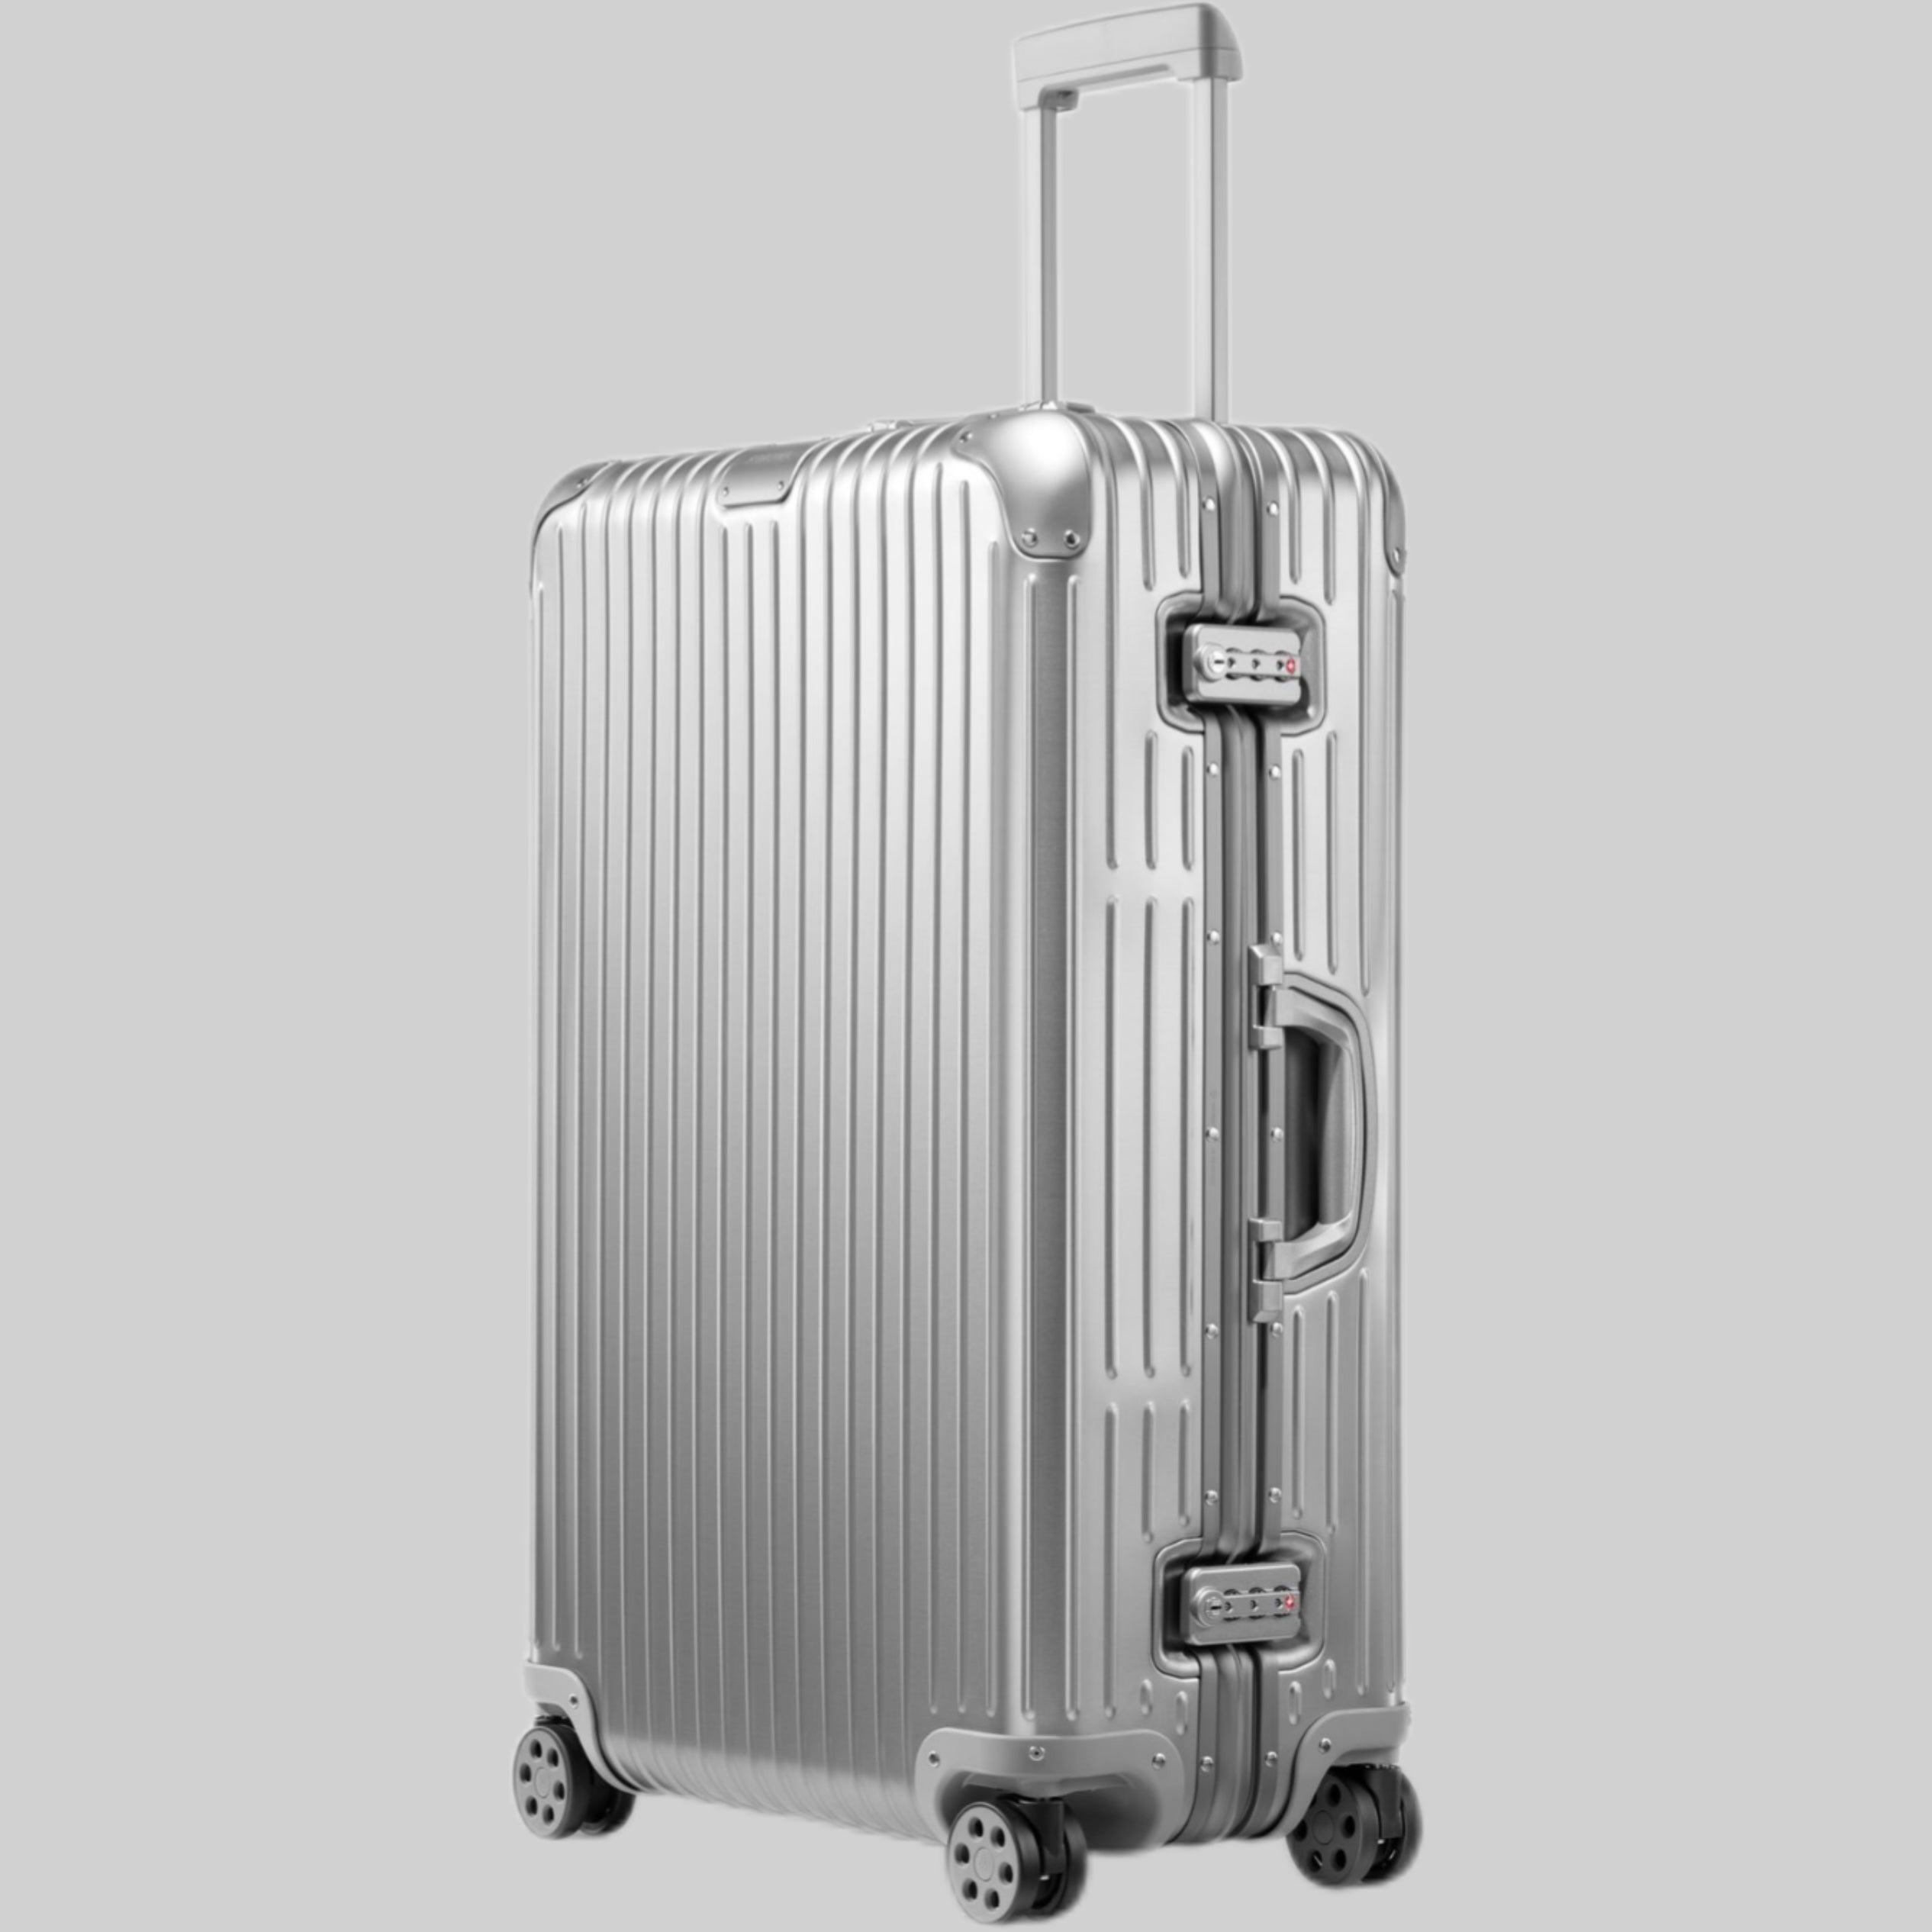 RIMOWA suitcase, silver, frontside